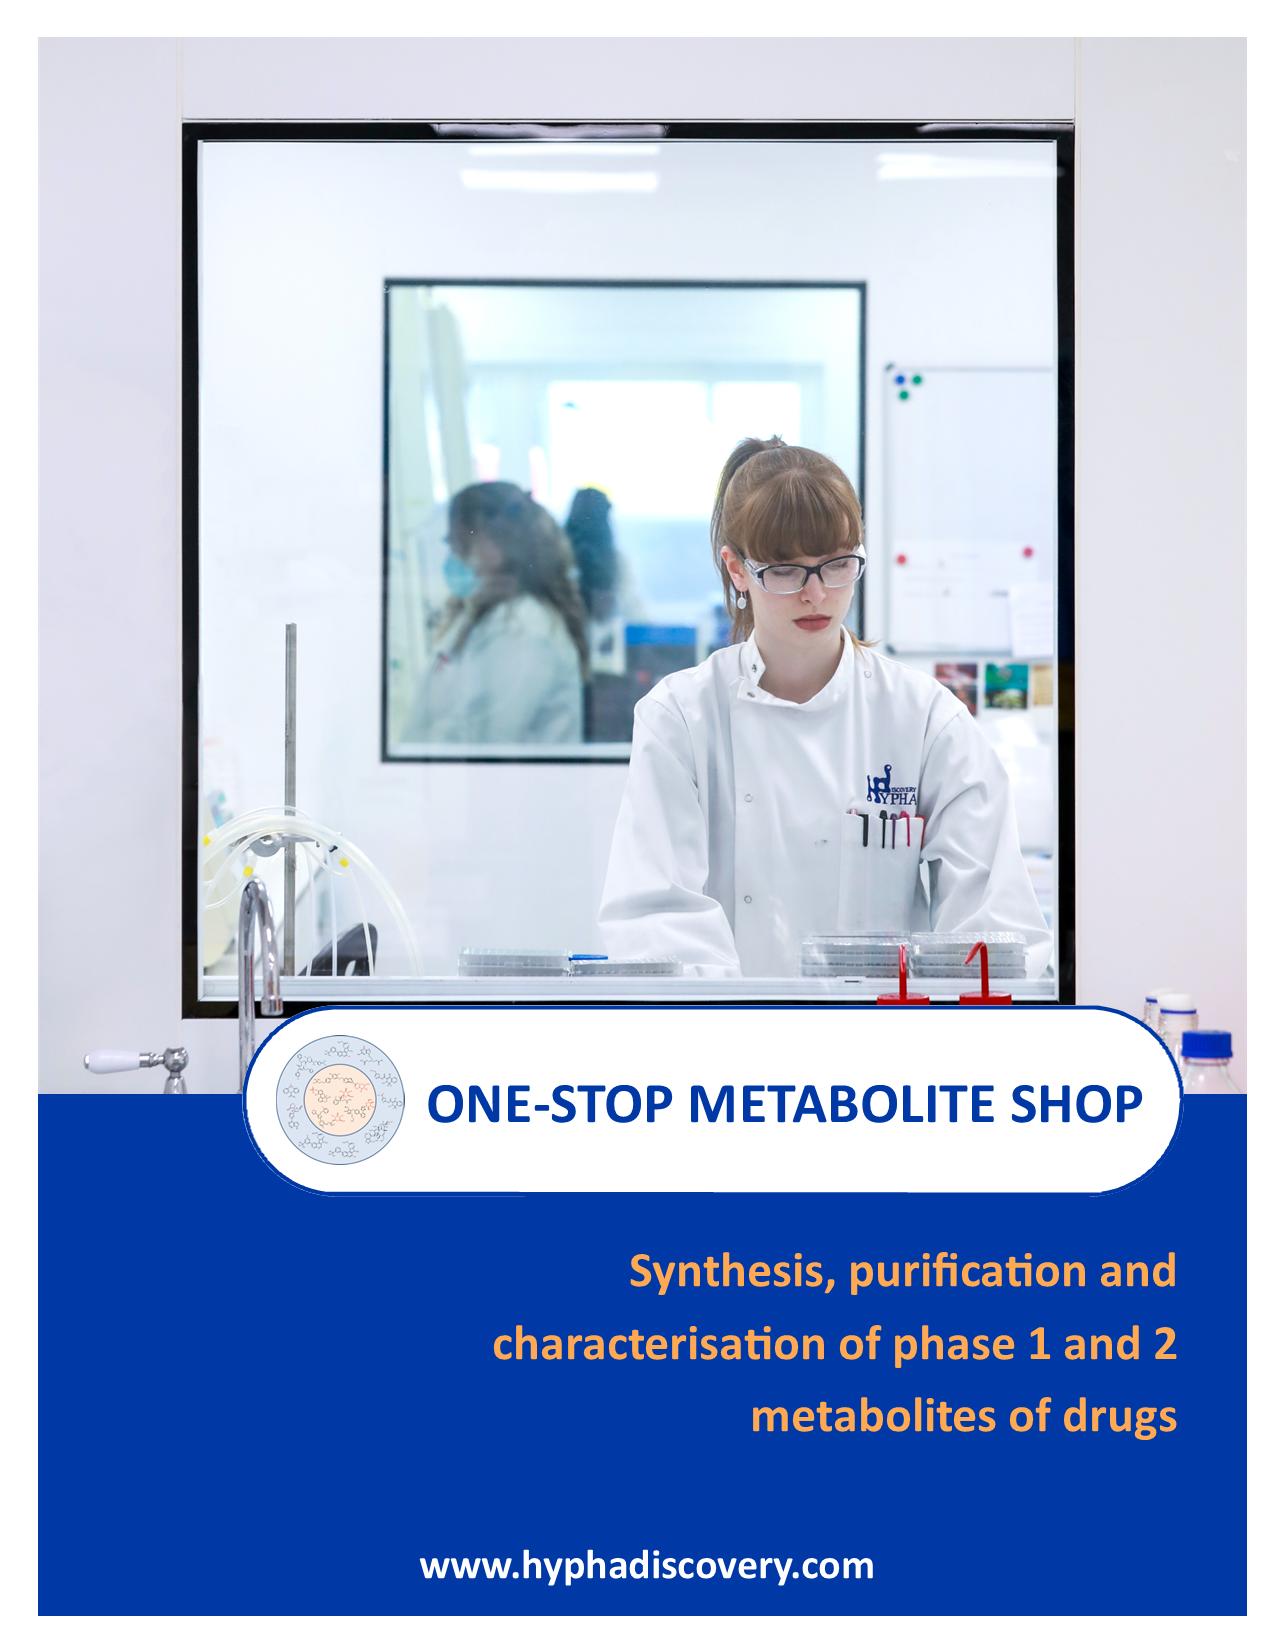 Front page of Hypha Discovery One-Stop Metabolite Shop Brochure